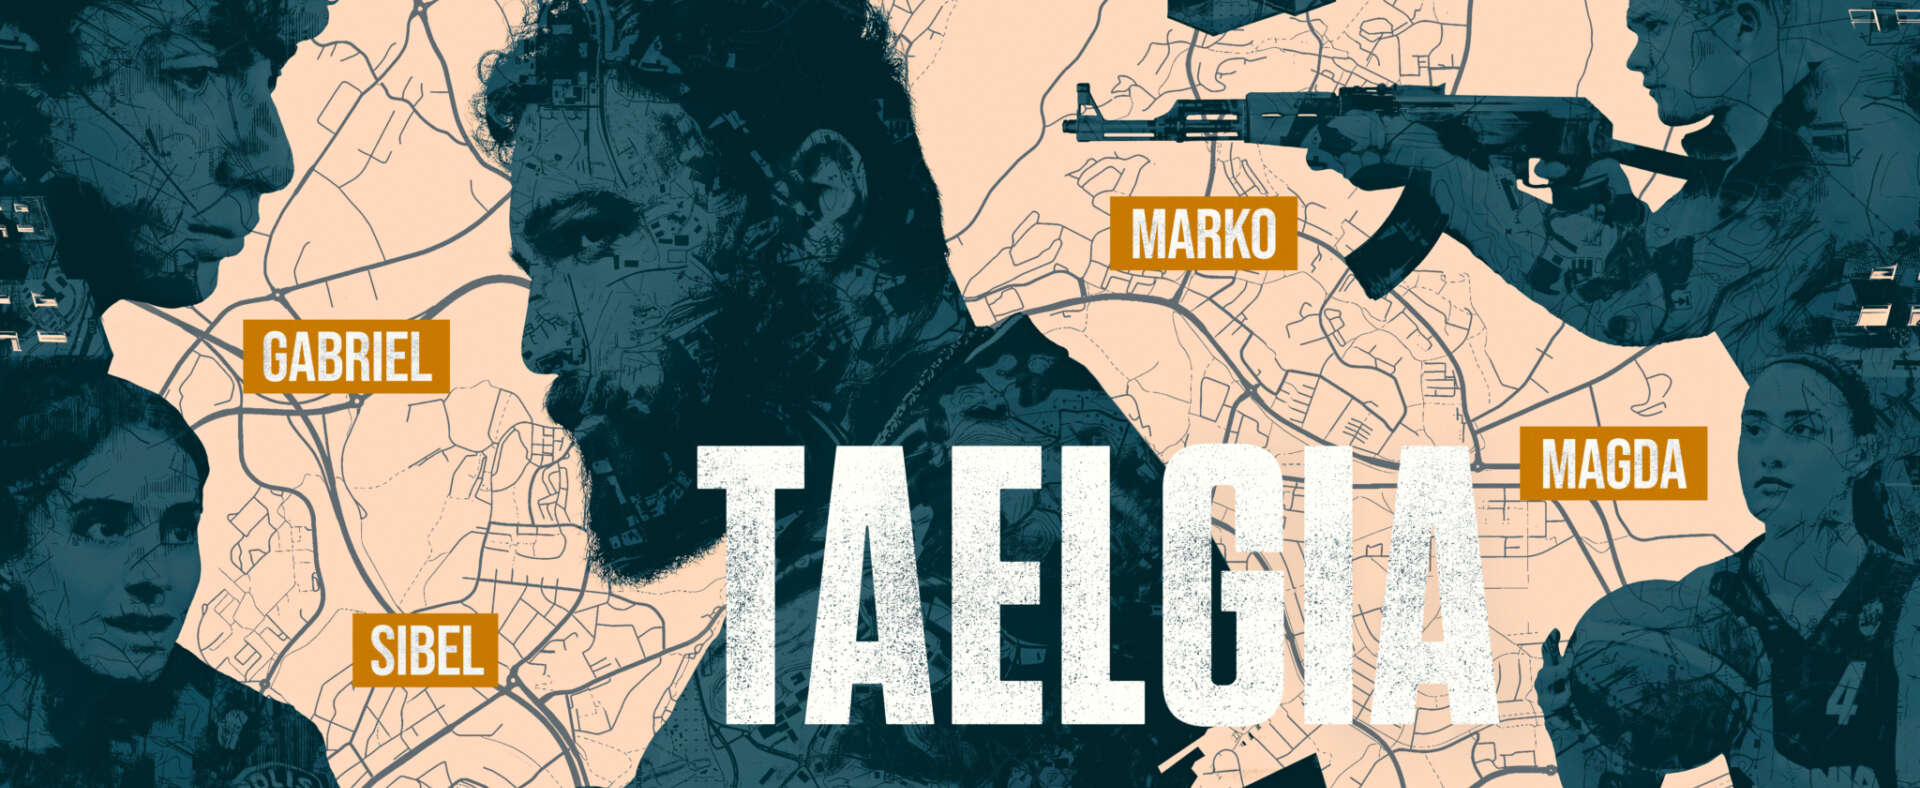 Taelgia creator on gang crime in Sweden, families caught in a spiral of  violence